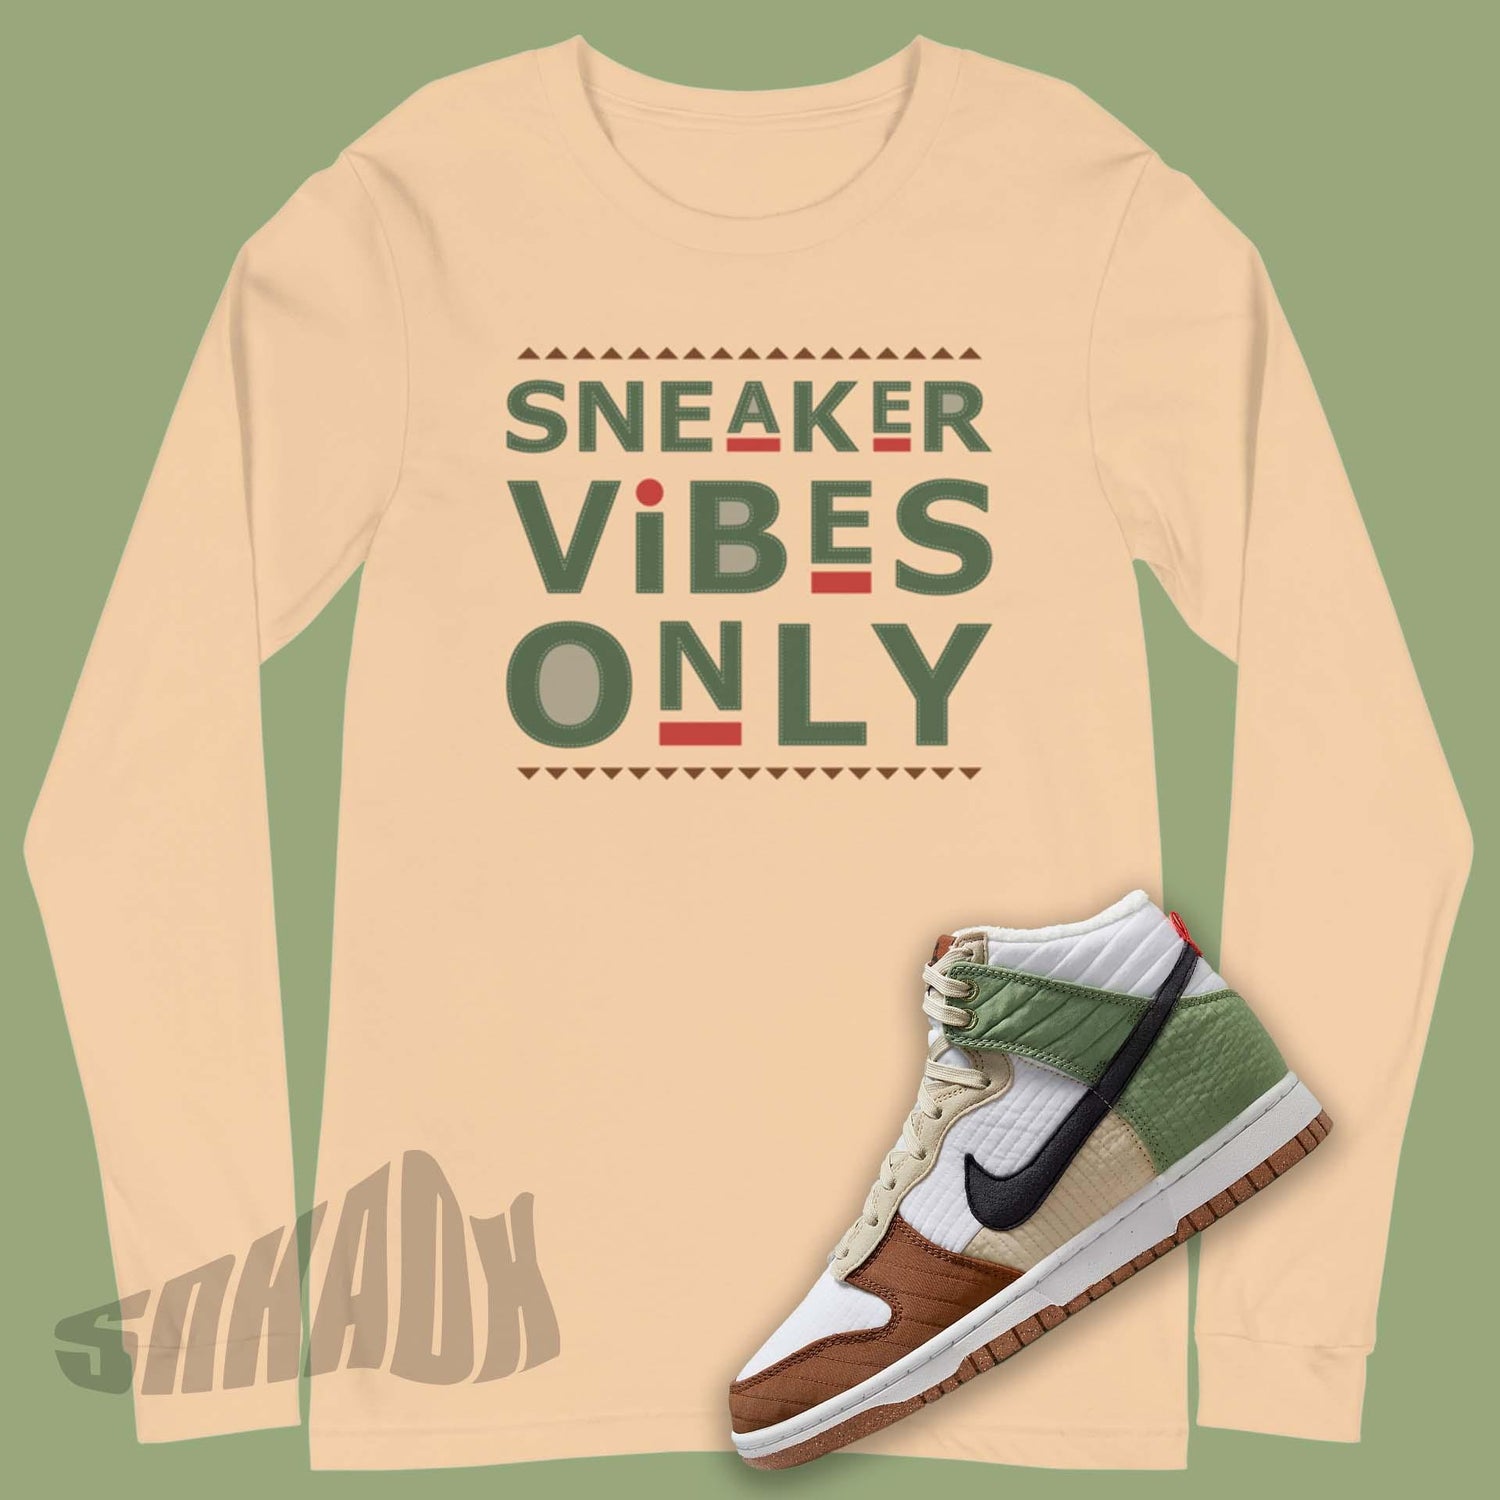 Long Sleeve Tan Shirt with Sneaker Vibes Only on front Sneaker Shirt